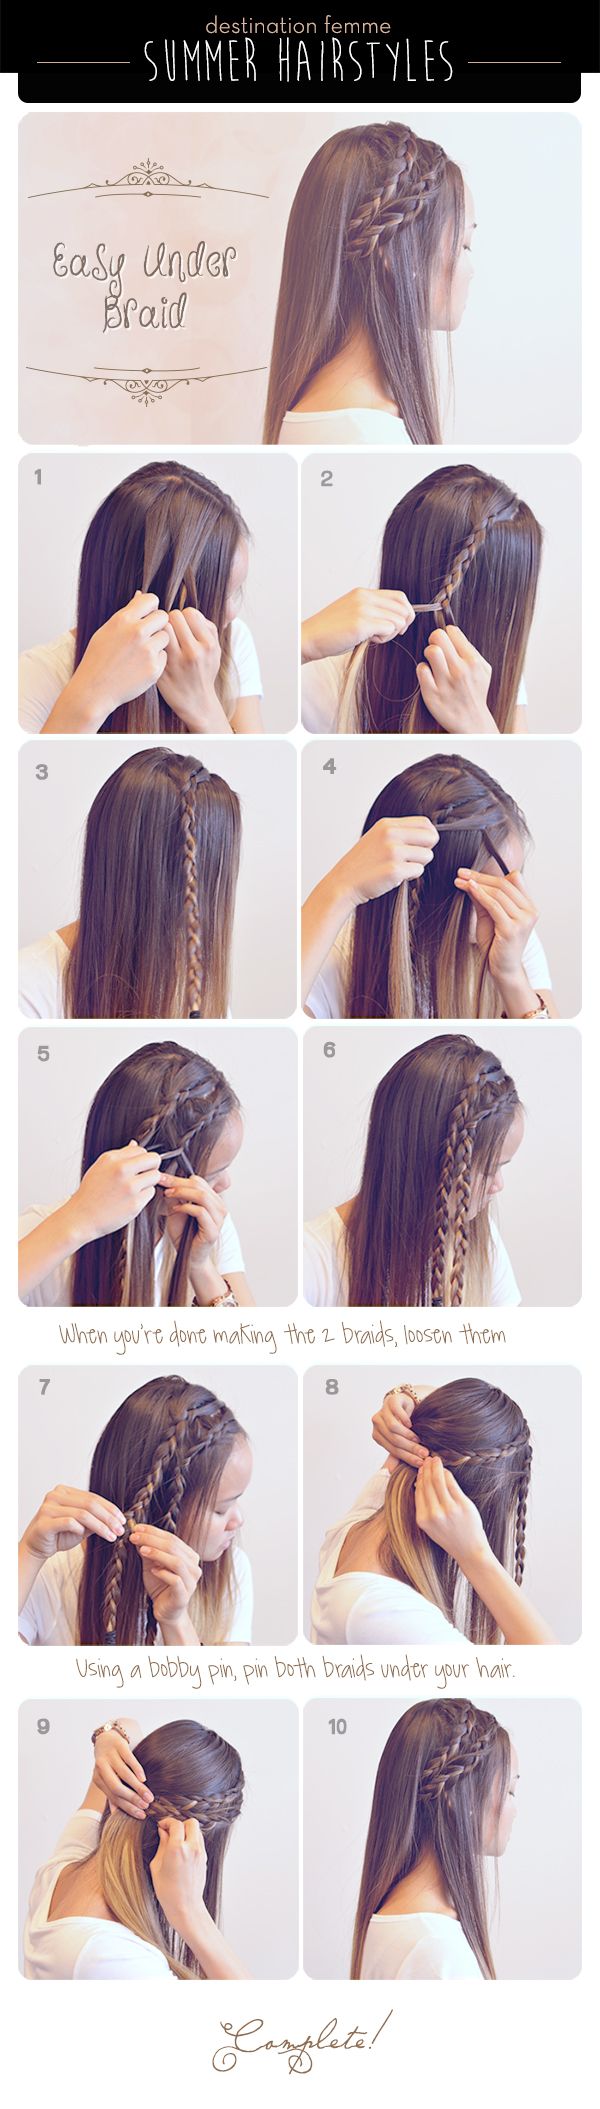 quick-hairstyles-for-long-hair-straight-hair-94_2 Quick hairstyles for long hair straight hair